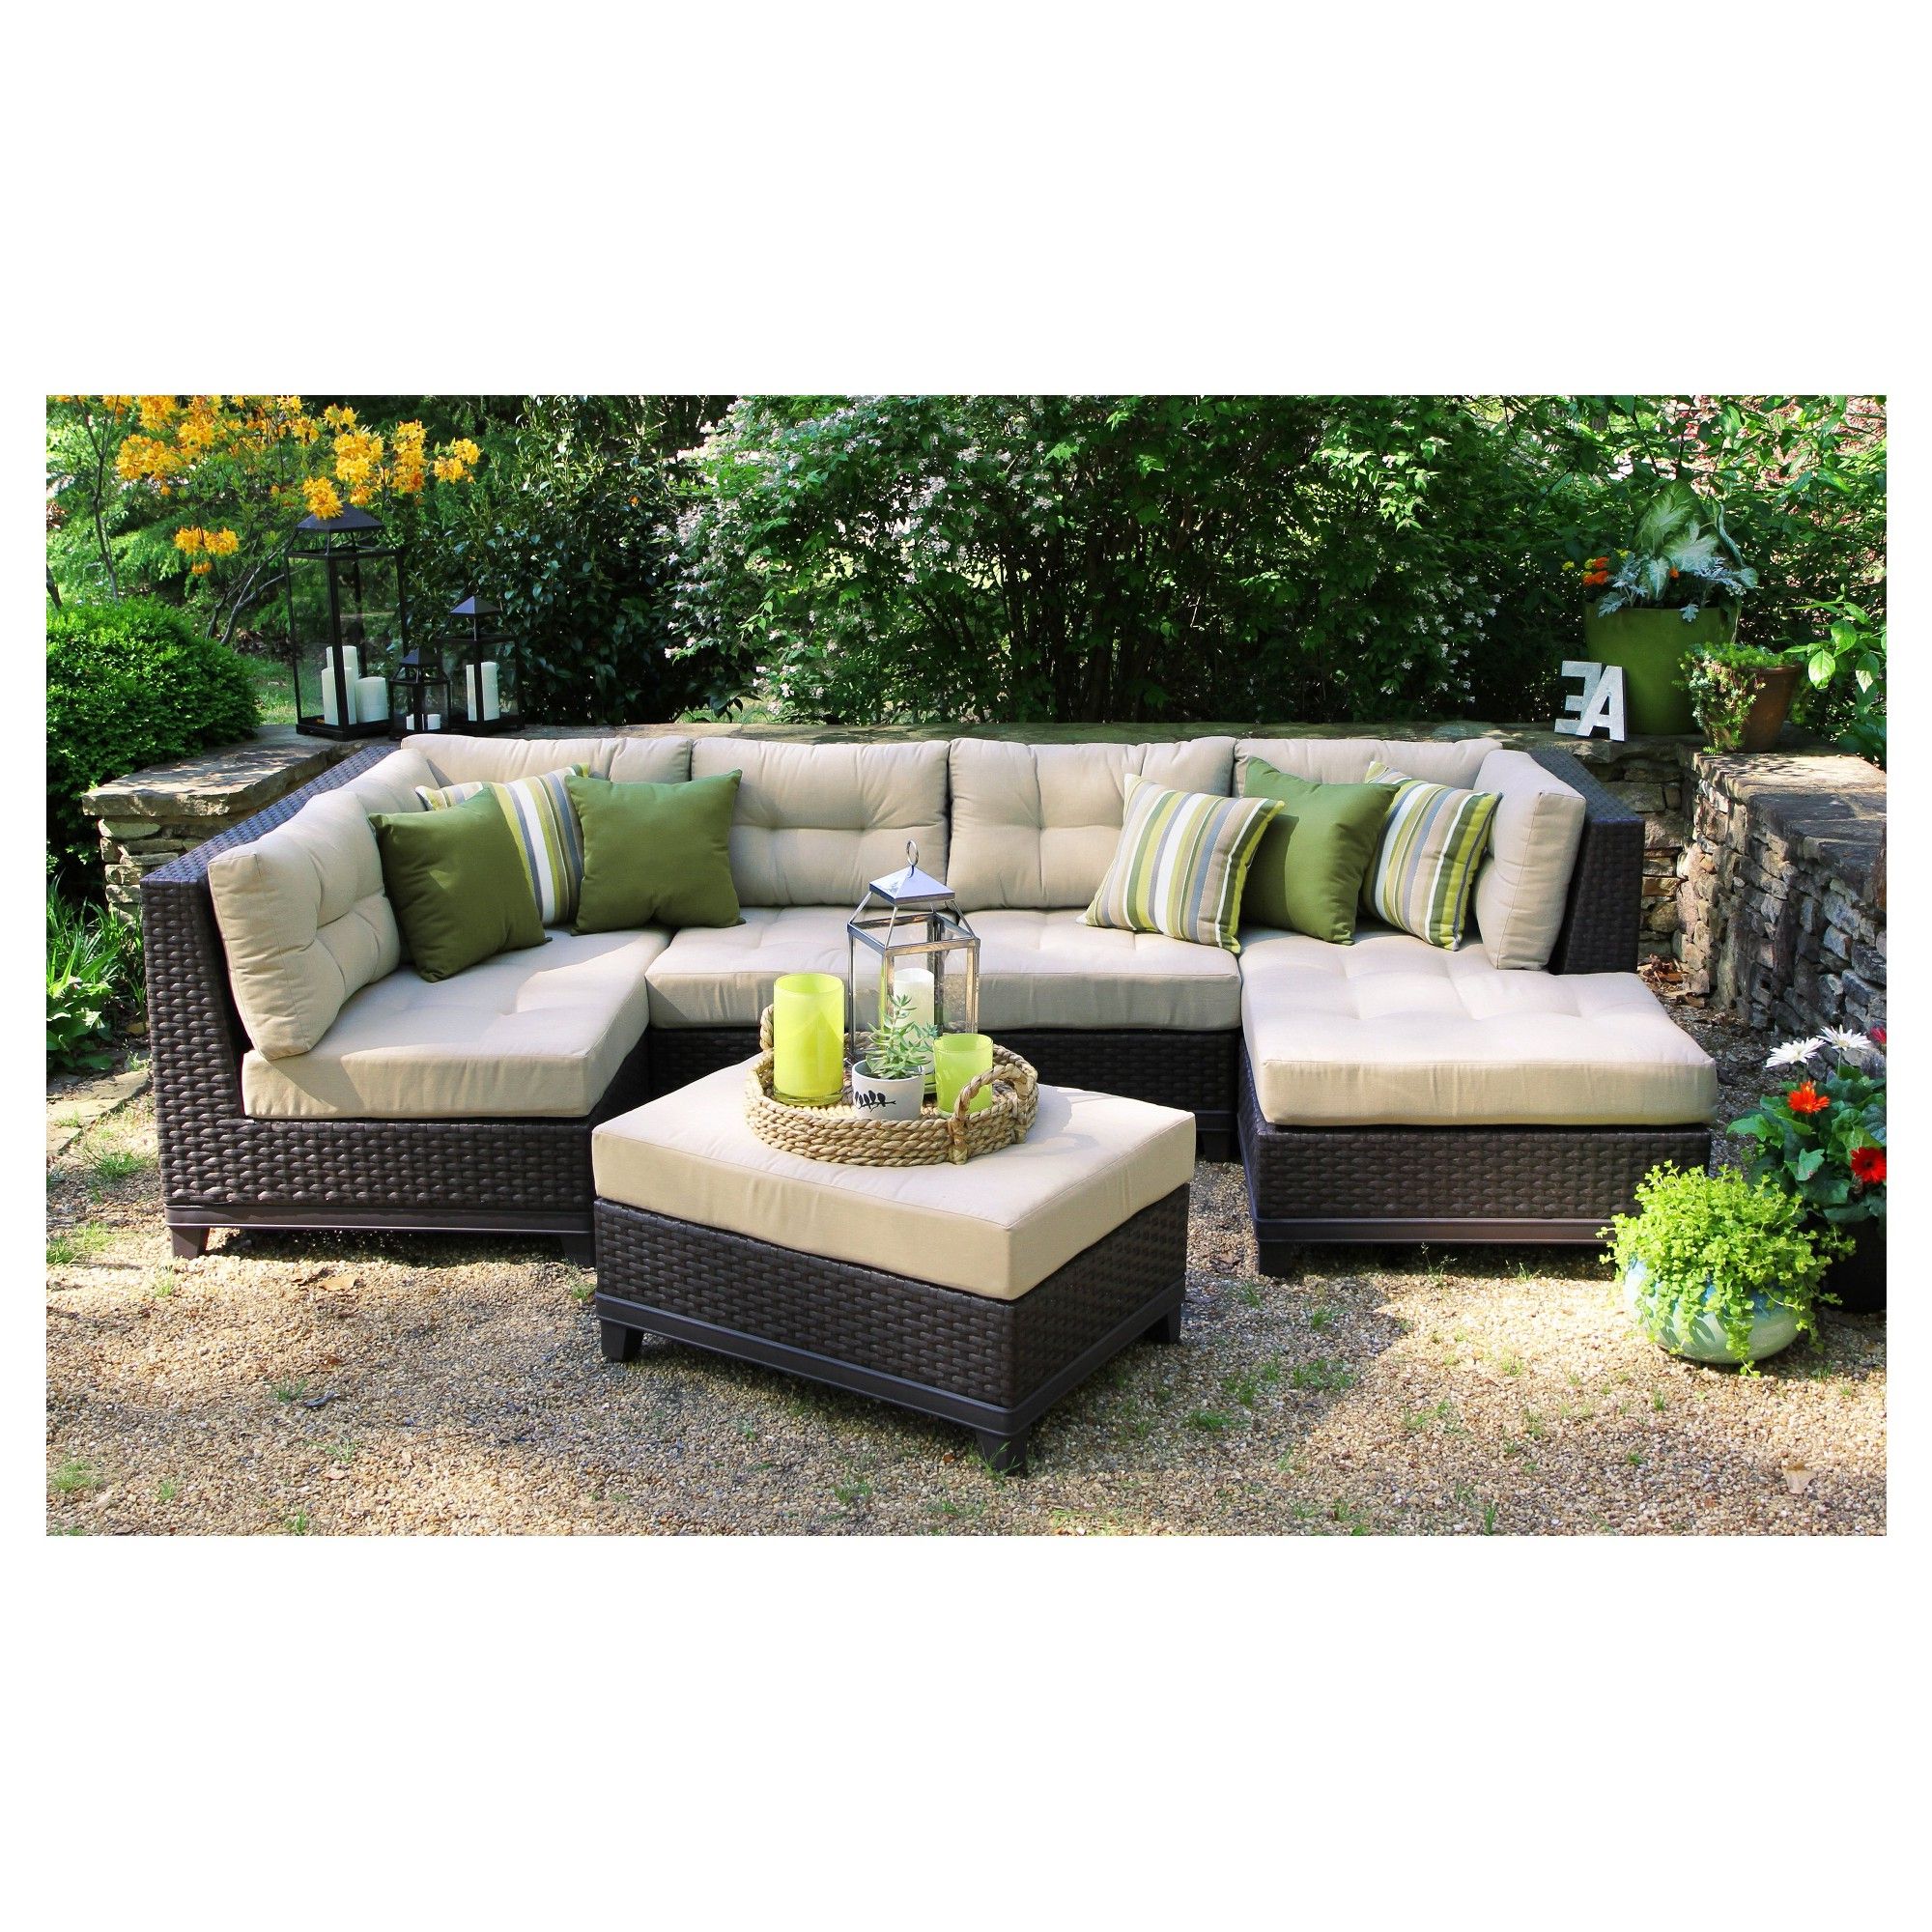 4 Piece Sierra Sunbrella Seating Group Intended For Widely Used Hillborough 4 Piece Sectional With Sunbrella Fabric Spectrum (View 1 of 25)